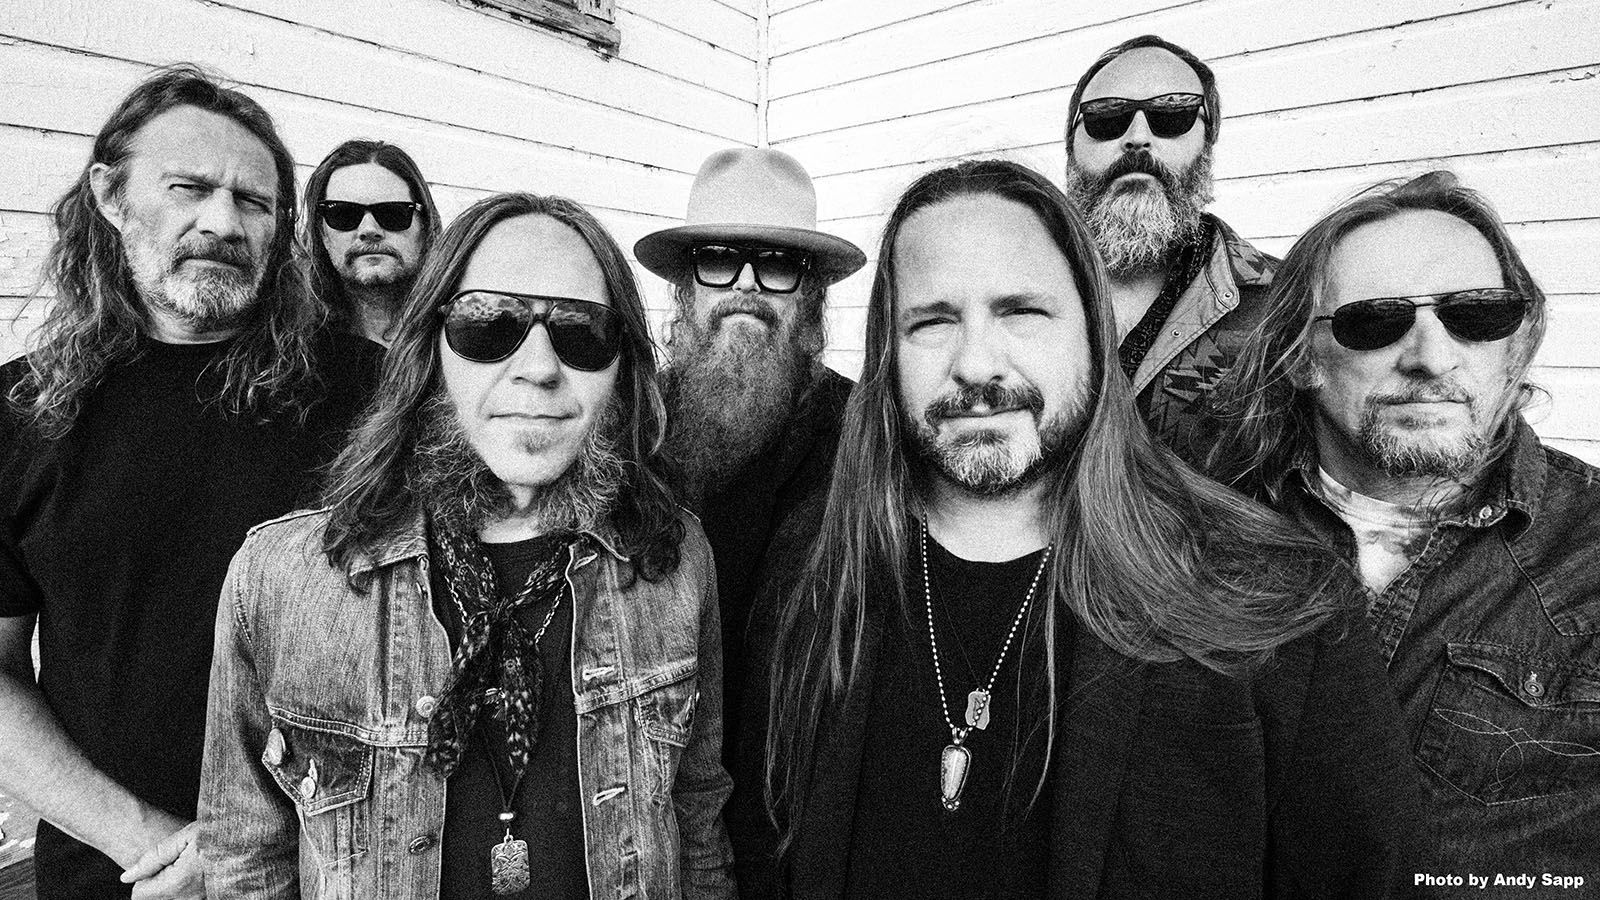 Blackberry Smoke will be at Sweetwater Performance Pavilion on Friday, July 26.